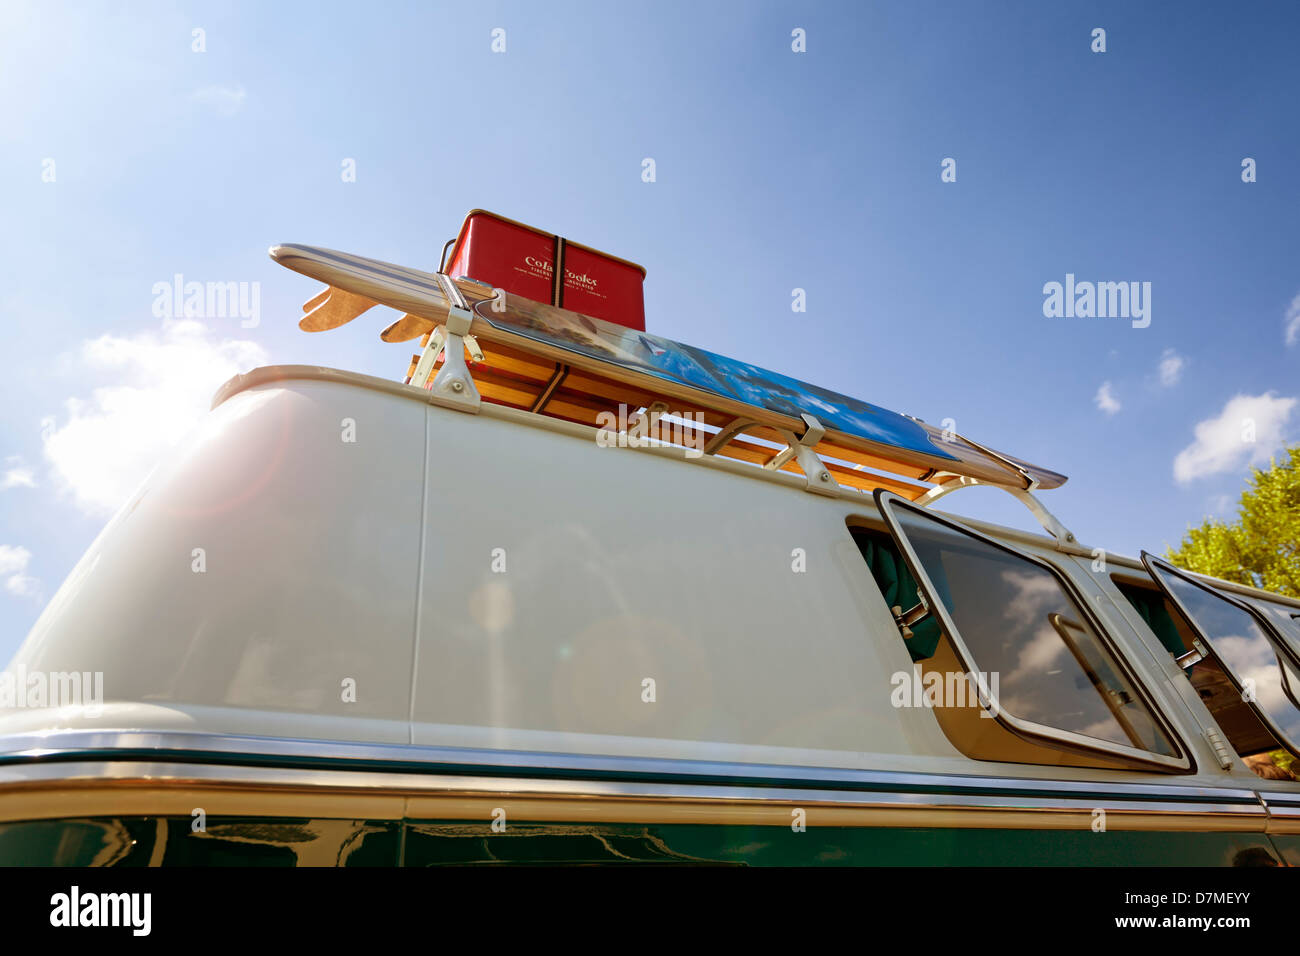 Detail of vintage Volkswagen van with surf board and ice box on its roof rack Stock Photo